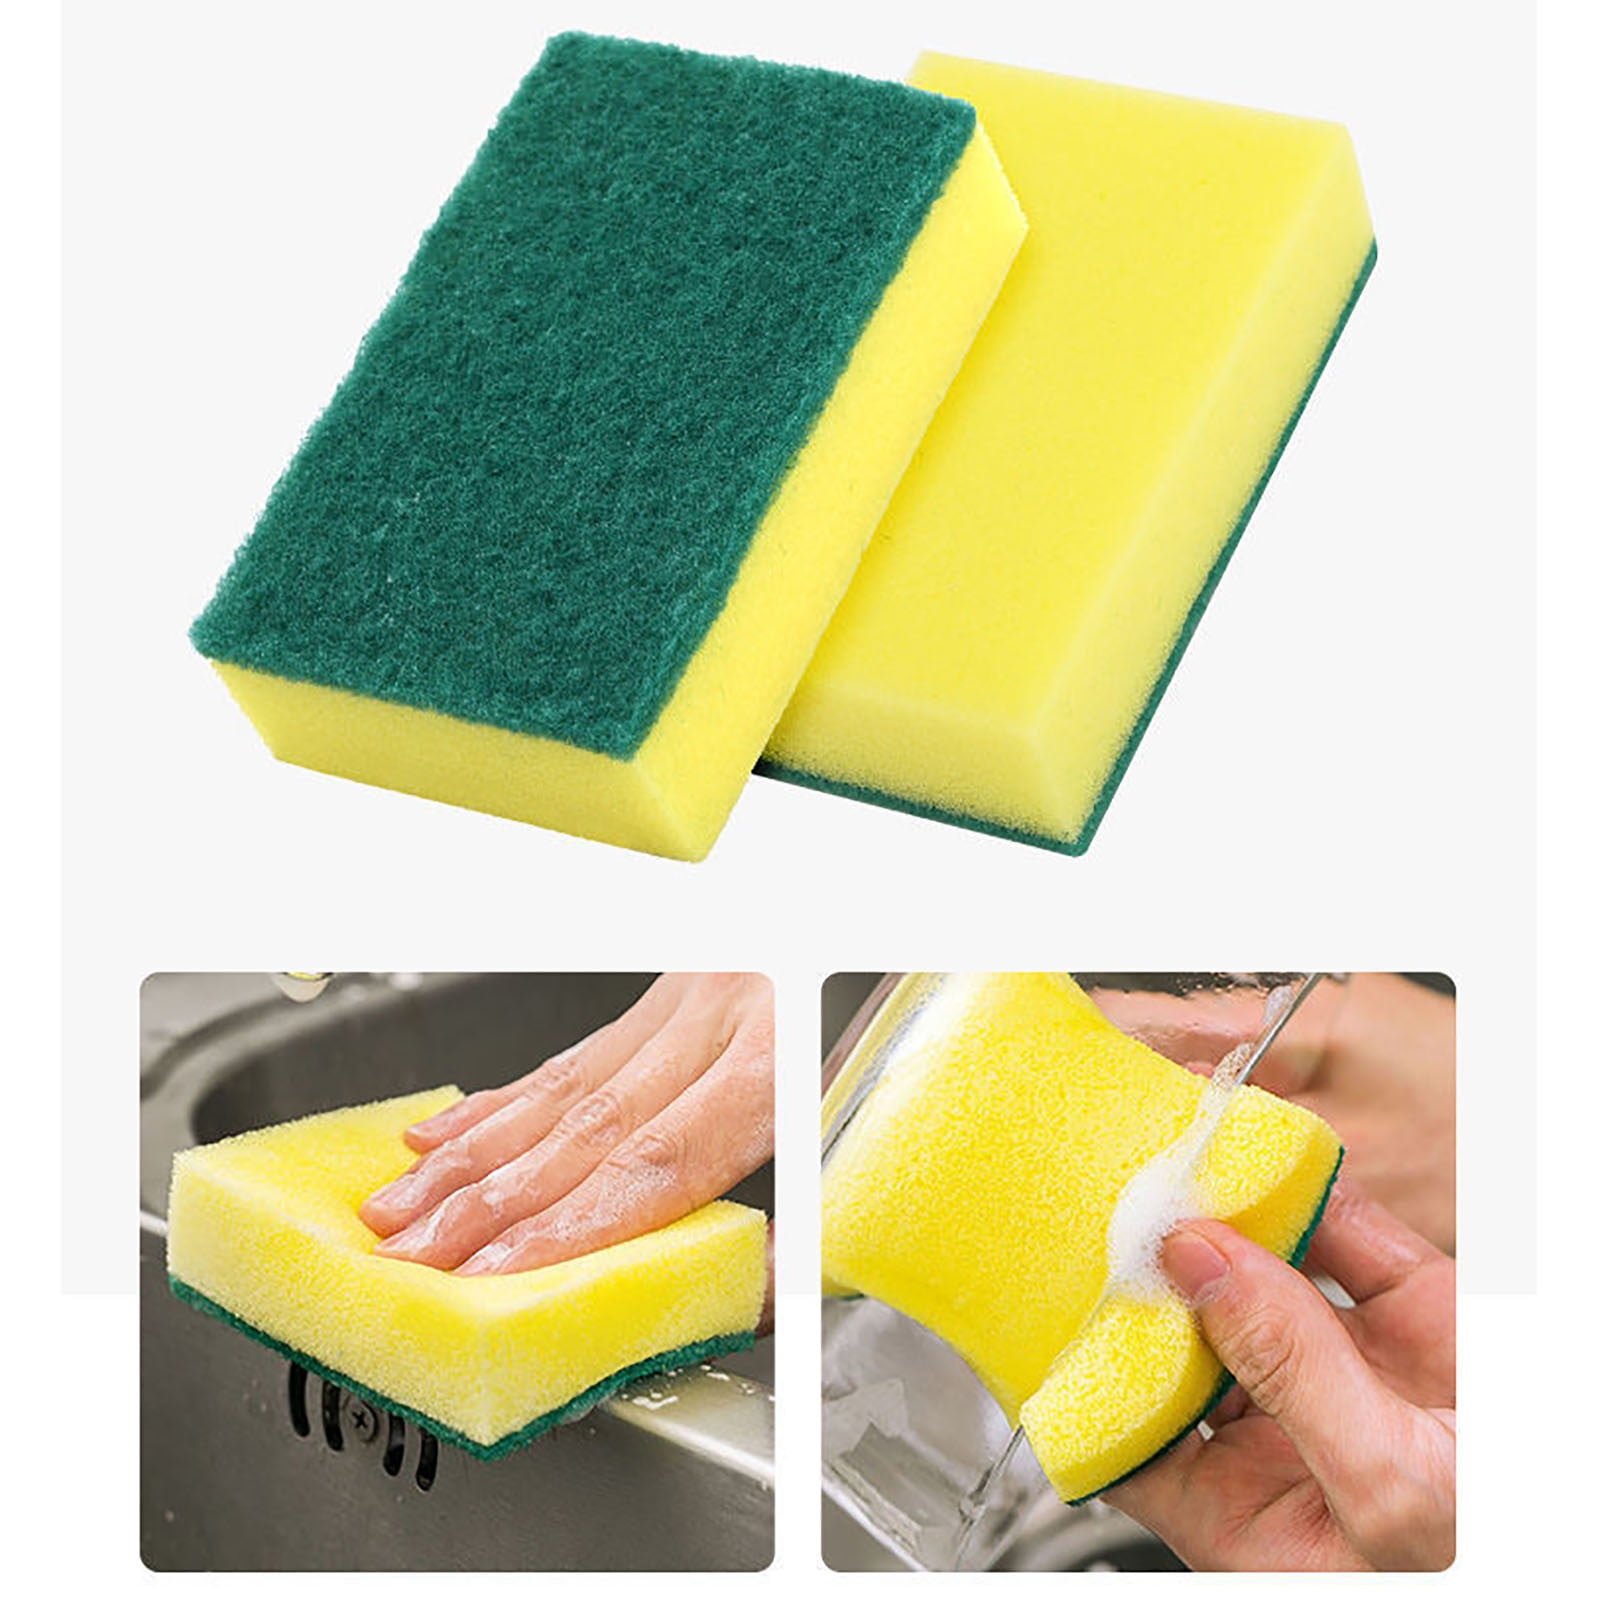  Large Kitchen Sponges for Dishes,Pop Up Eco Friendly Bathroom Cleaning  Sponge for Countertop,Tiles,Walls,Floors,Natural Compostable Scrubber for  Dish,Car,Kayak,Compressed Cellulose Sponges 6 Pack : Health & Household